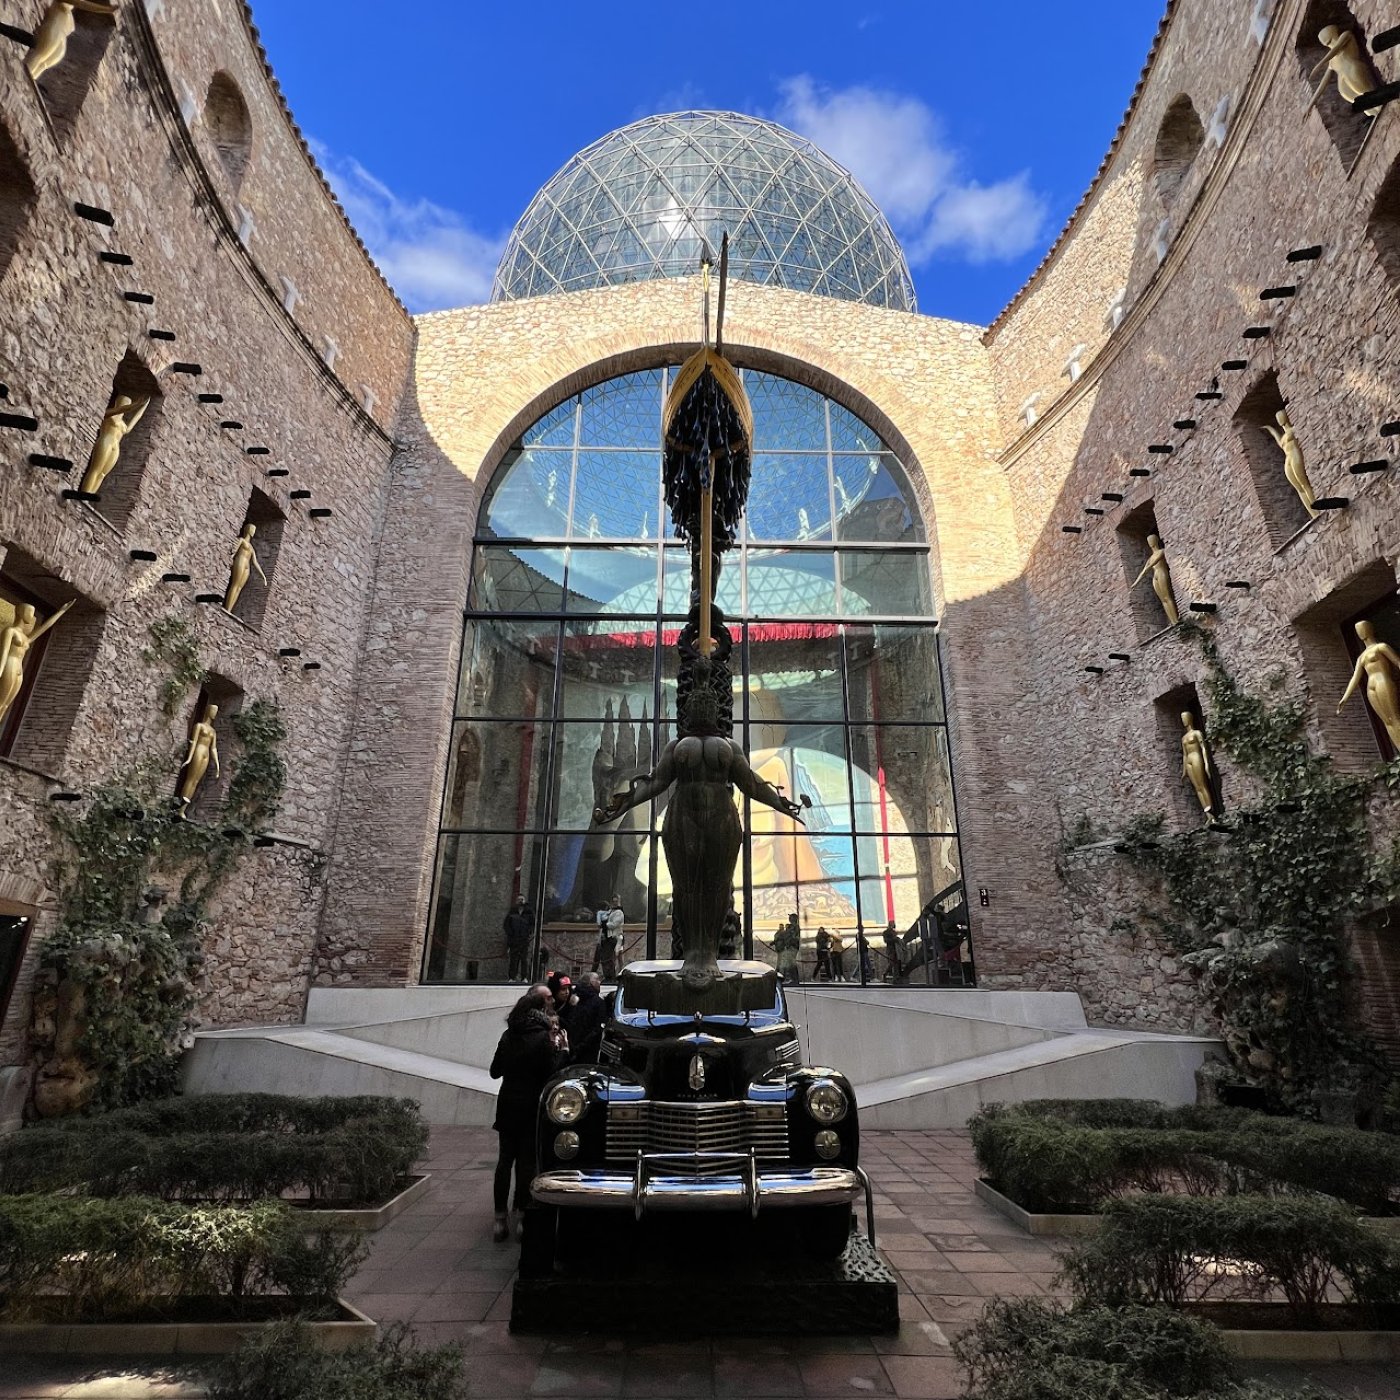 The courtyard of the Salvador Dali Museum in Spain.